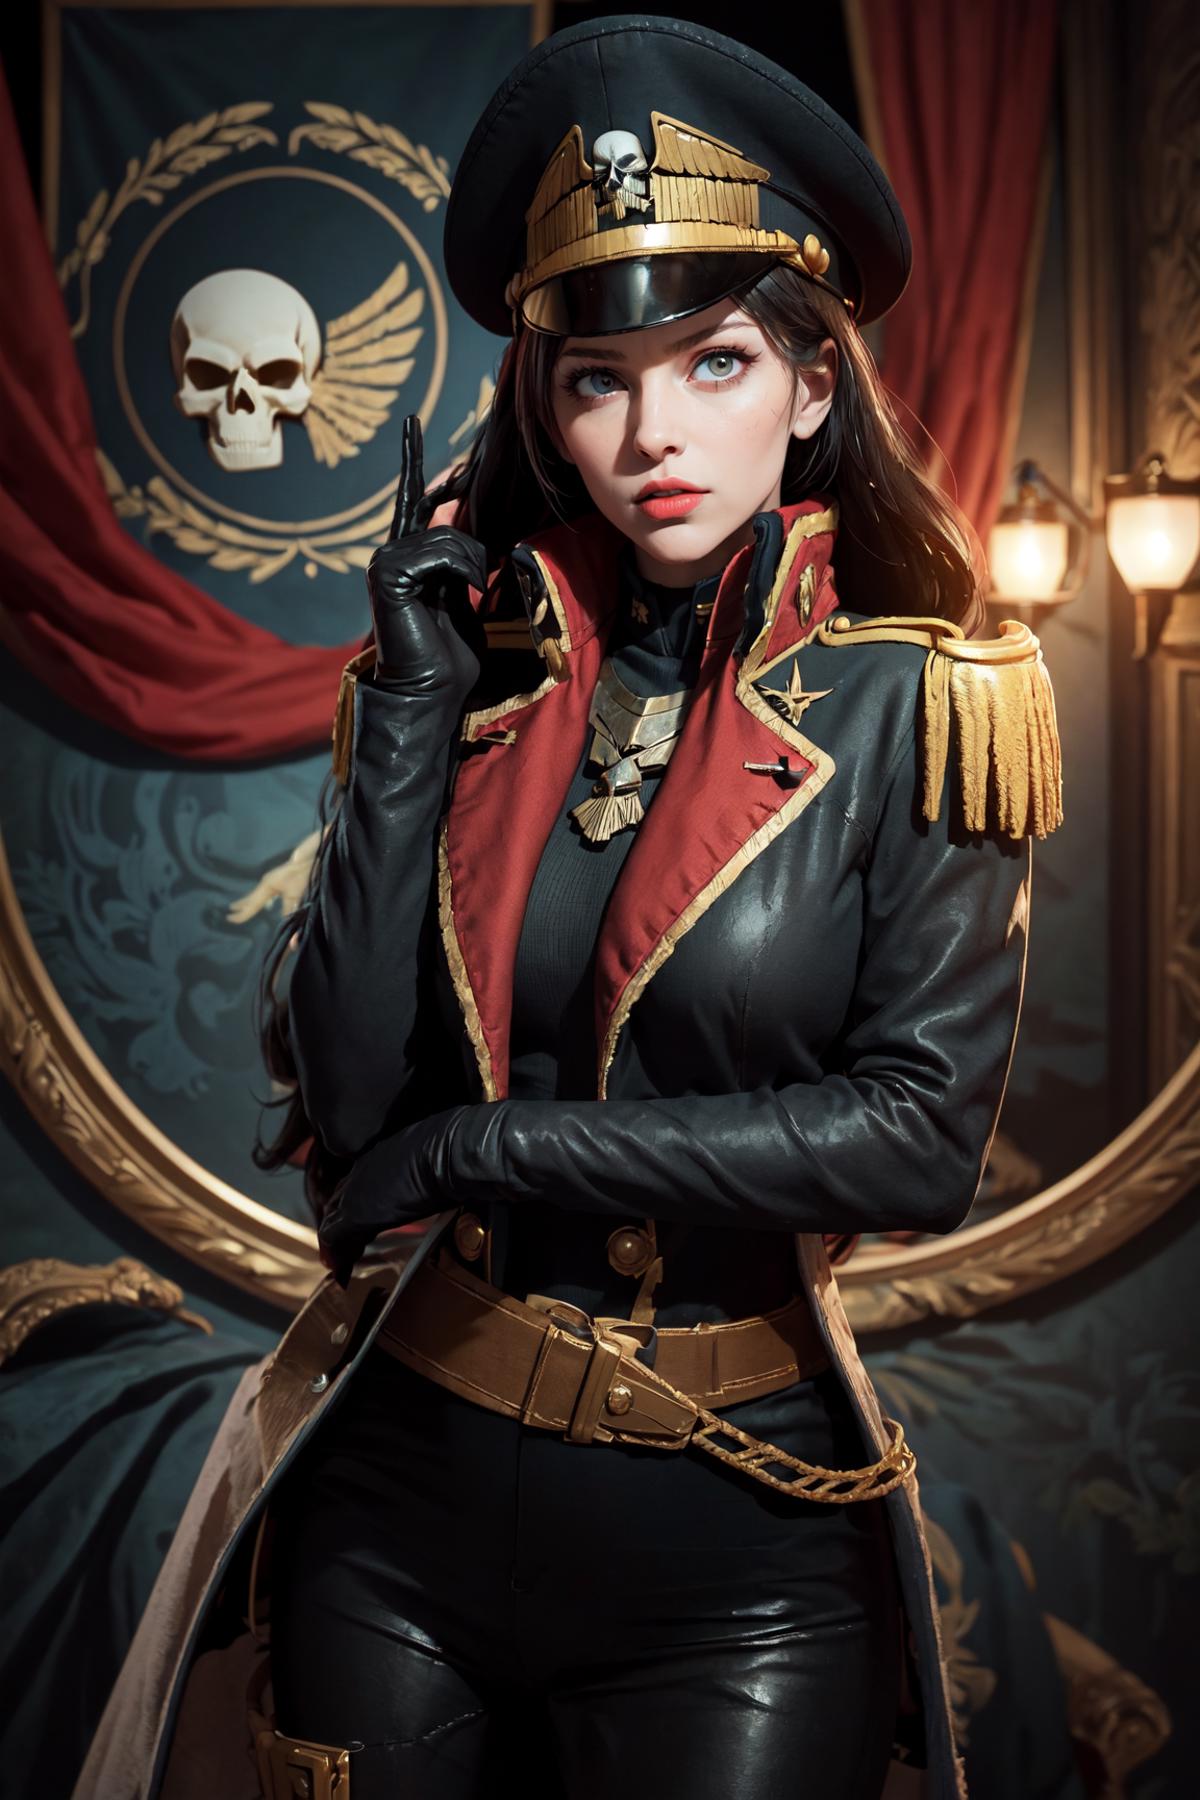 A woman in a military costume wearing black leather and red trim, with her hand on her face and a cell phone in her ear.